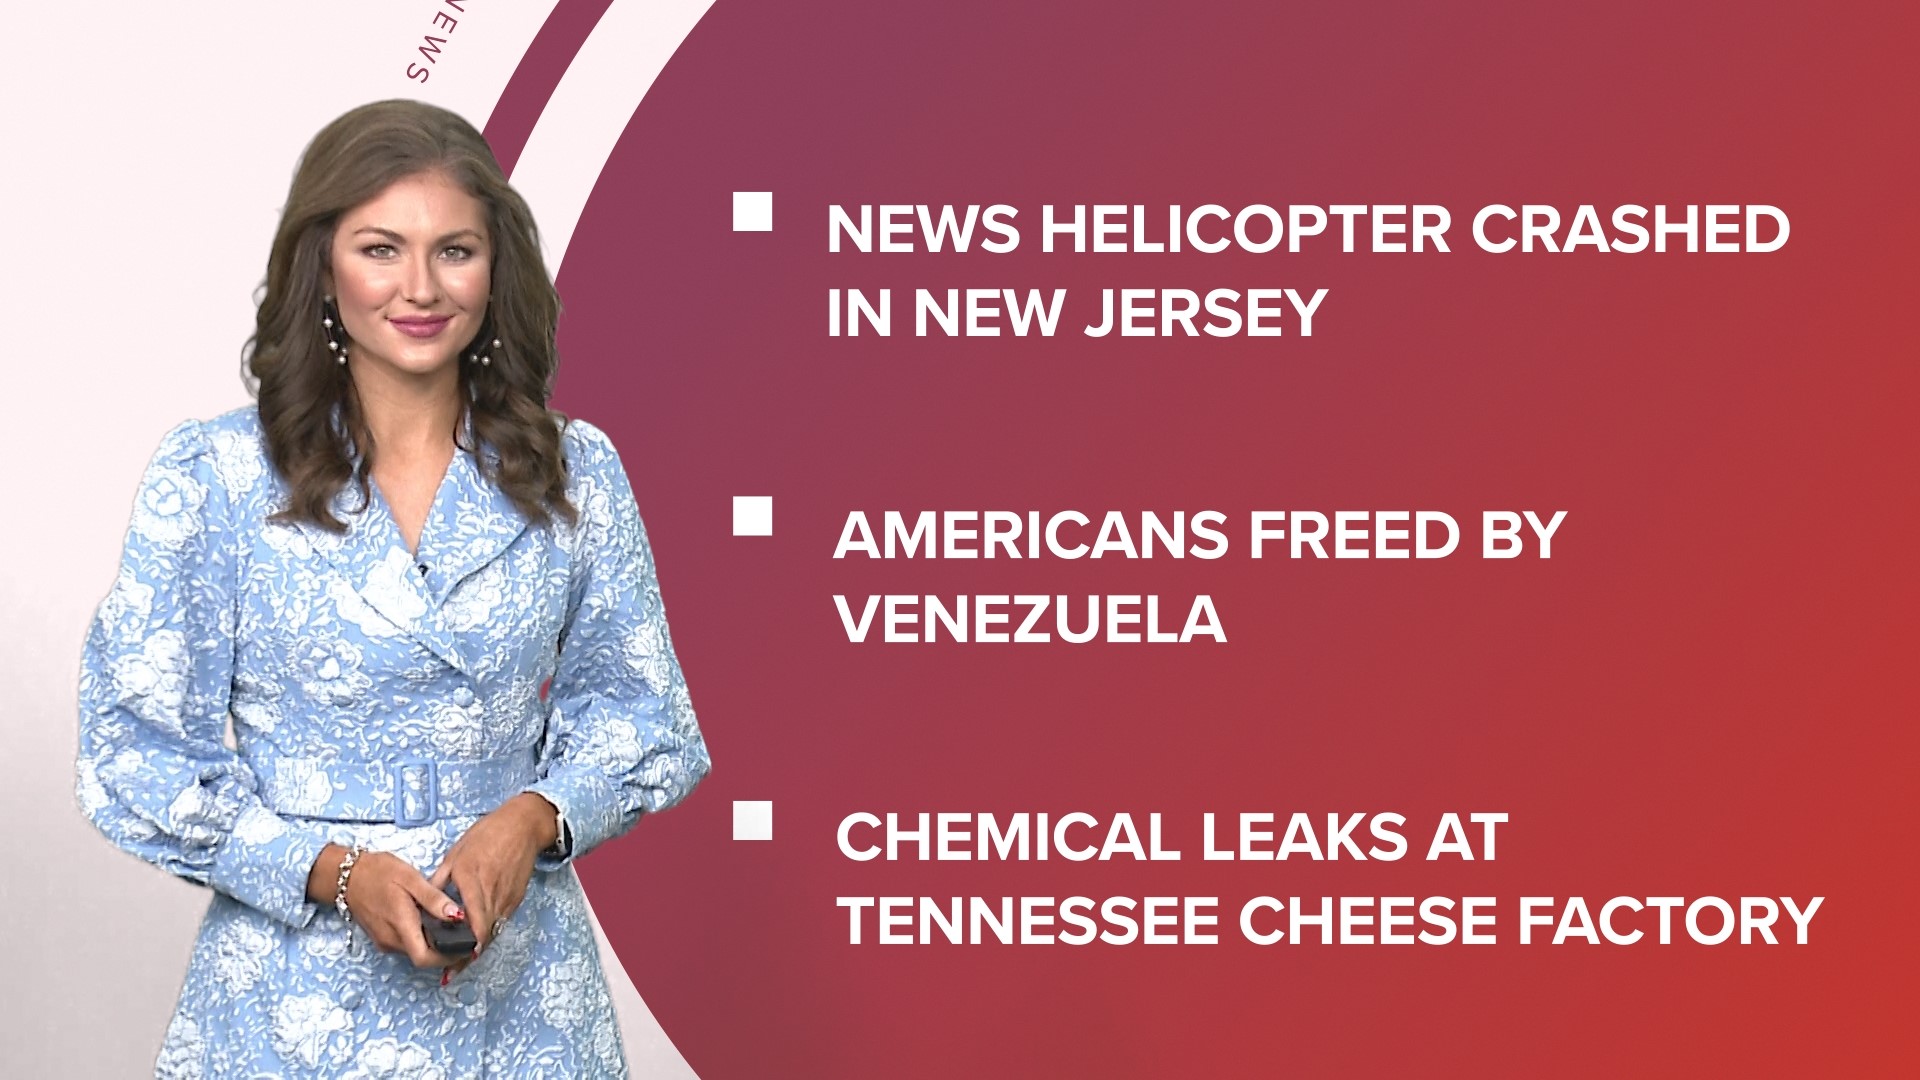 A look at what is happening in the news from a fatal helicopter crash in Philadelphia to U.S. swaps prisoners with Venezuela and pet shelters full for the holidays.